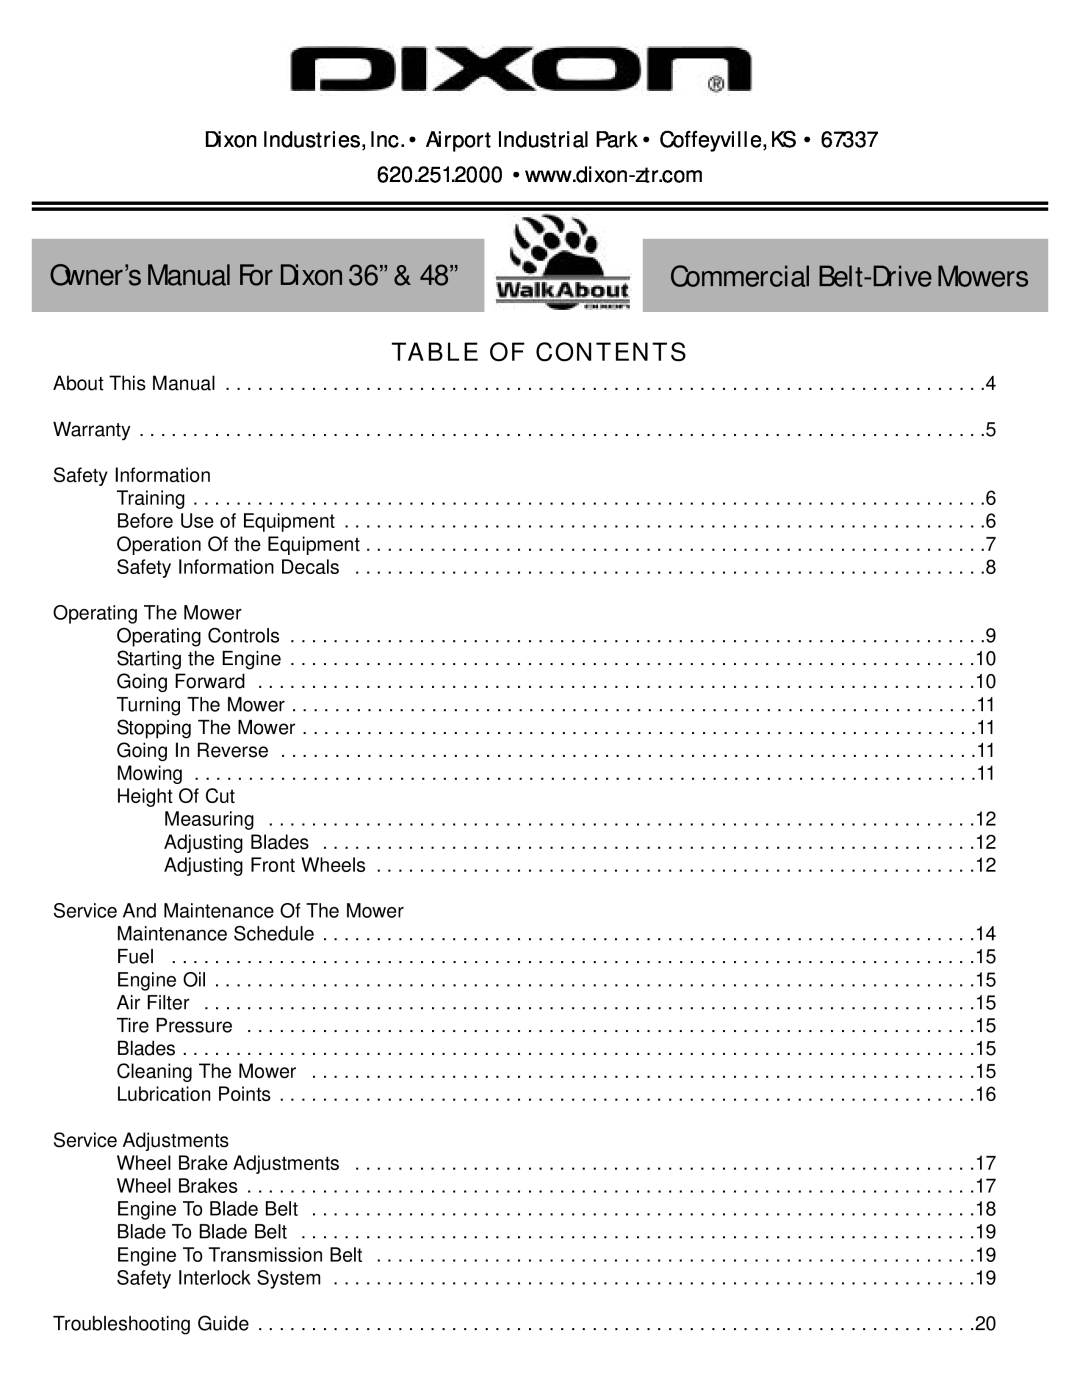 Dixon 36 & 48 owner manual Commercial Belt-DriveMowers, Table Of Contents 